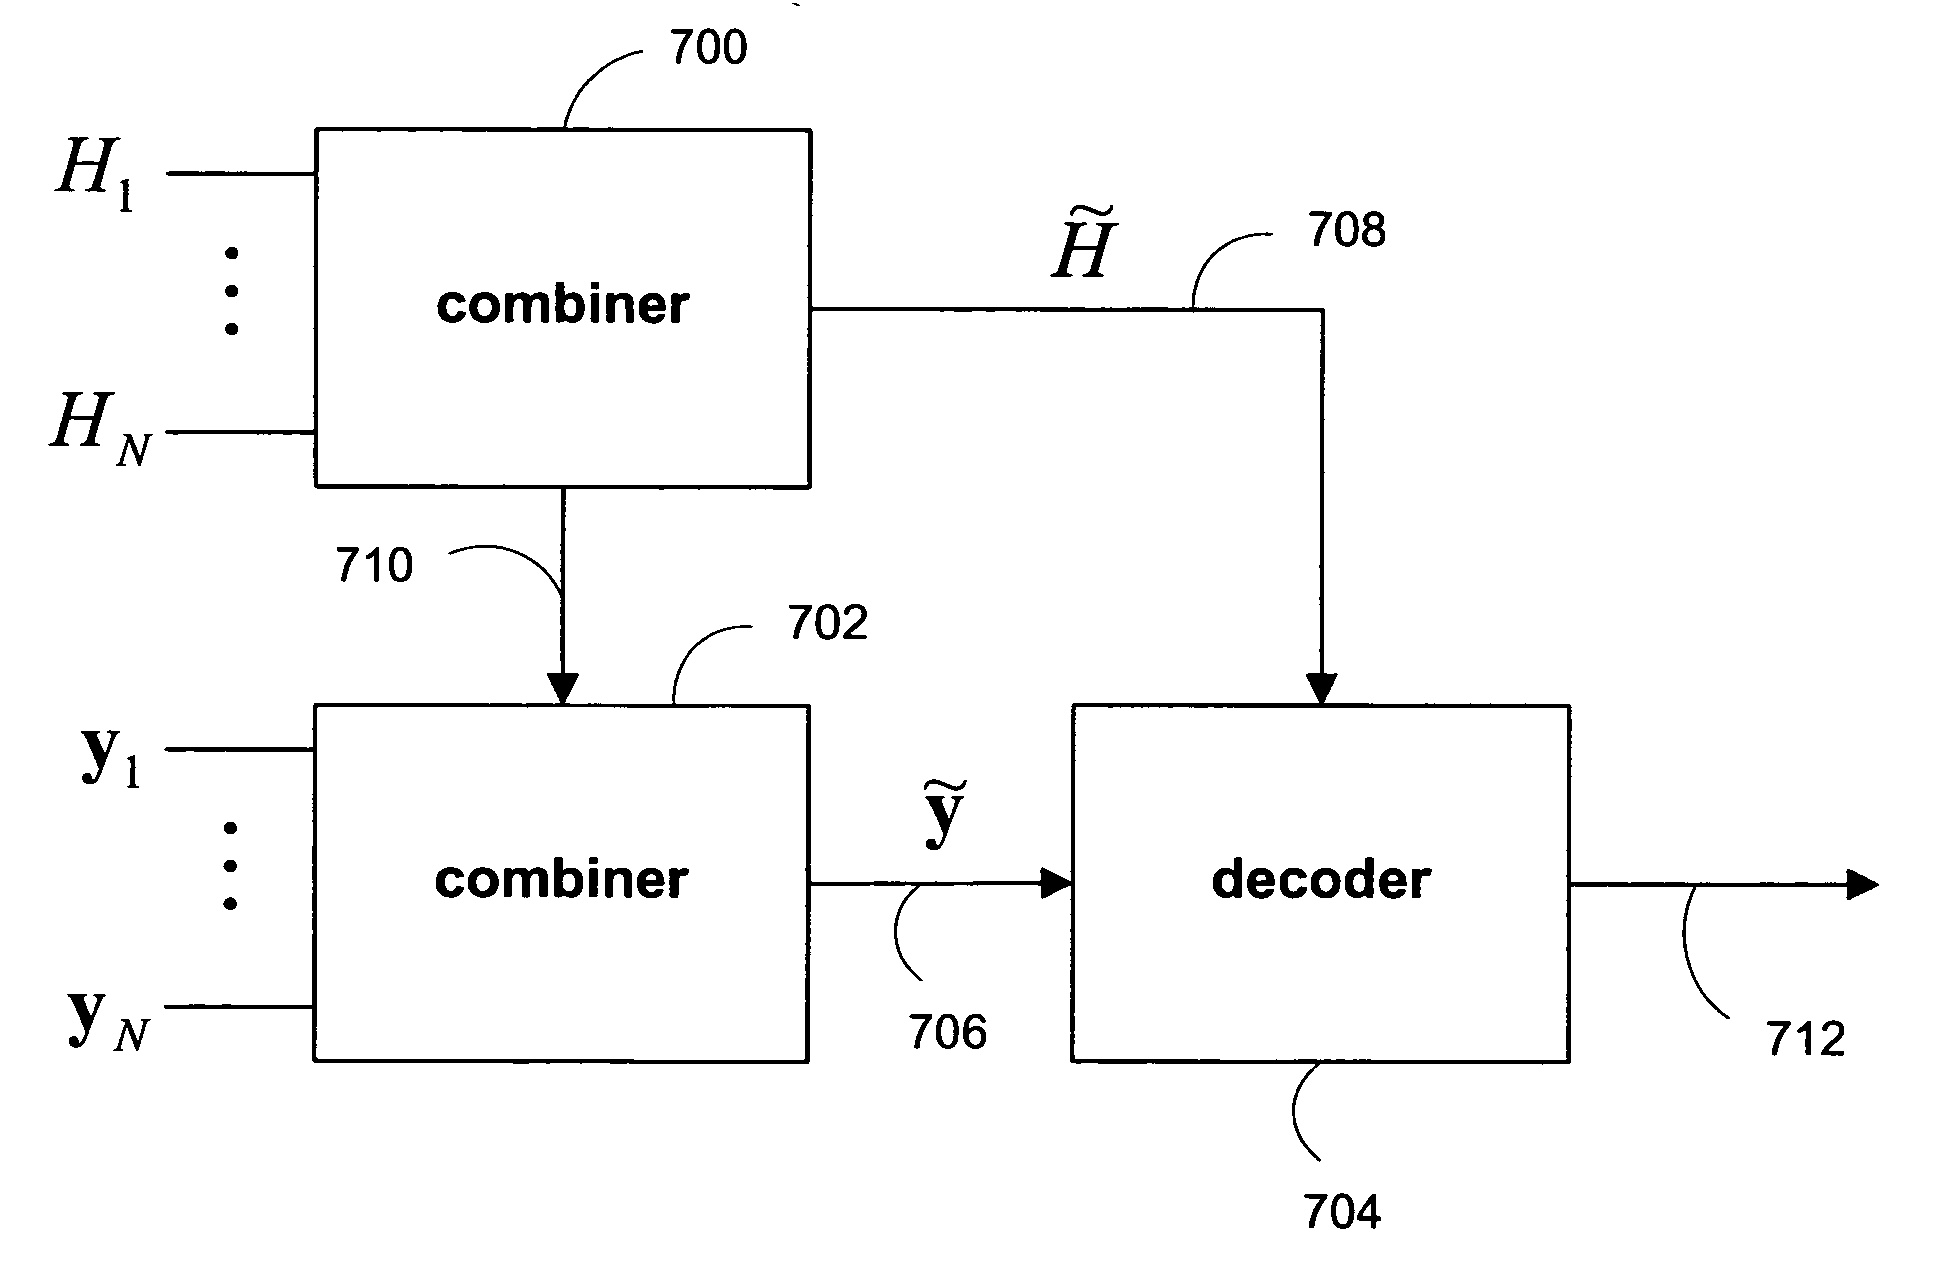 Concatenation-assisted symbol-level combining for MIMO systems with HARQ and/or repetition coding